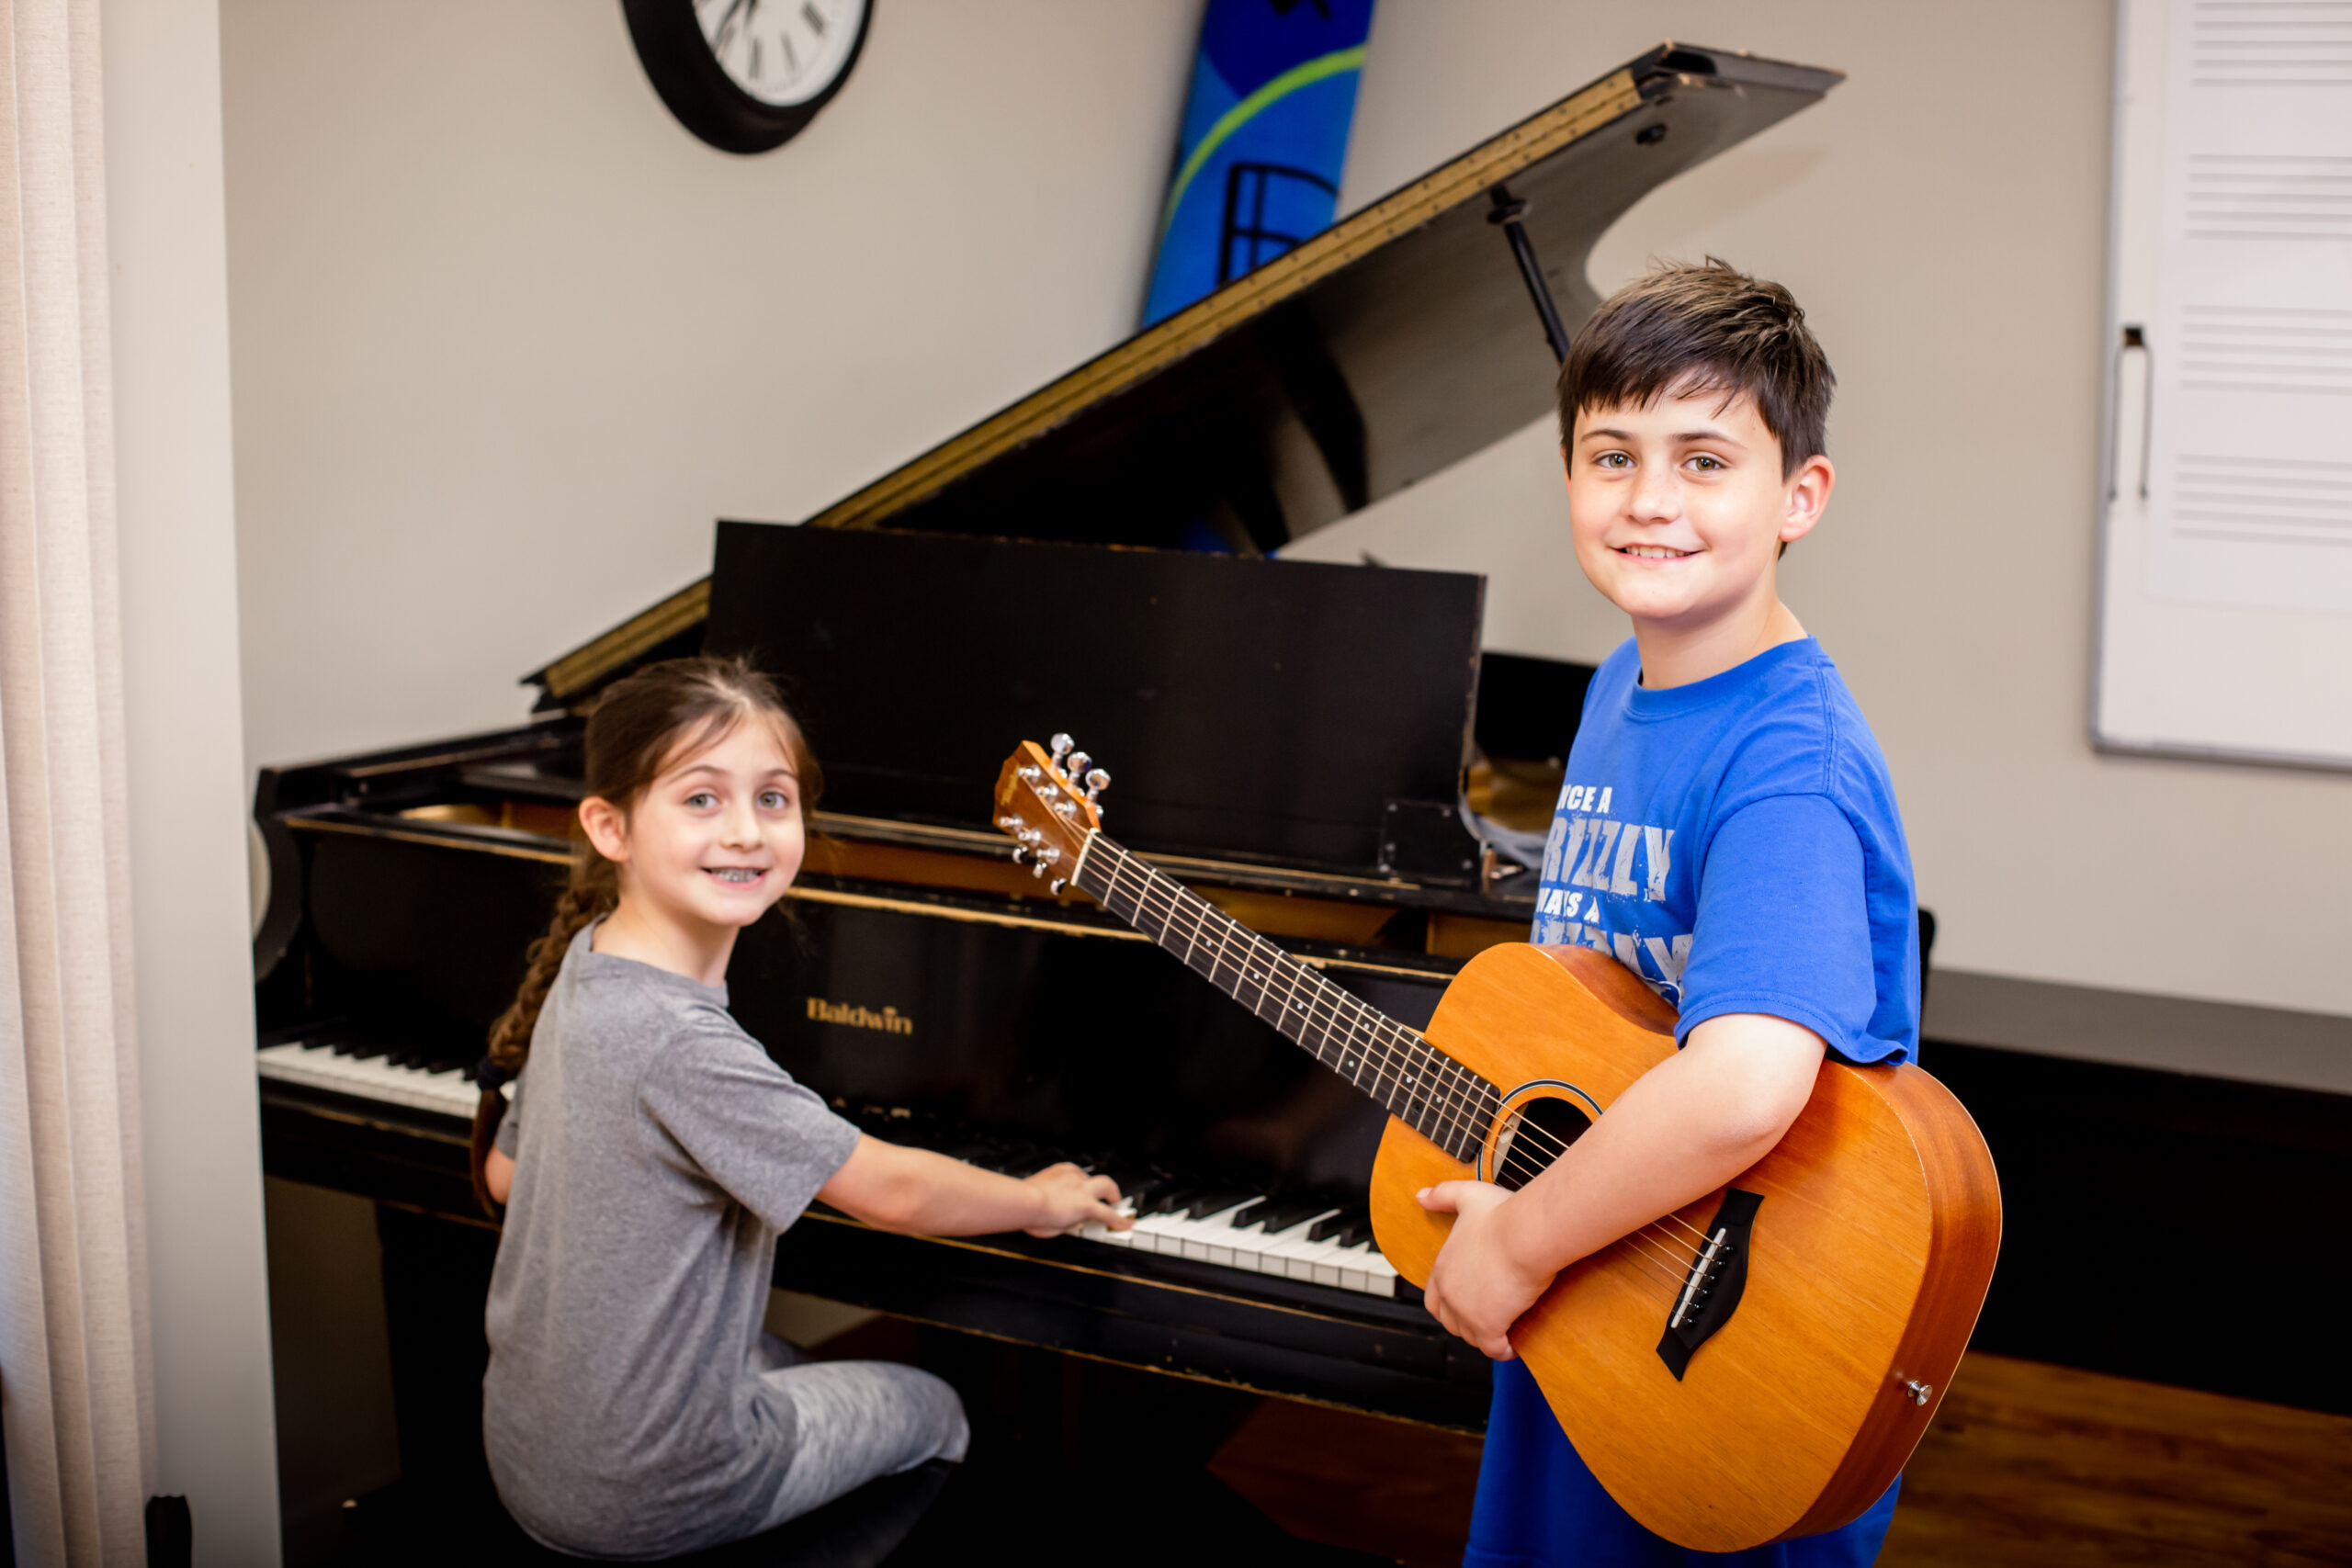 music lessons guitar lessons piano lesson voice lessons violin lesssons singing lessons drum lessons in st joseph mo near me toddler music art classes 55 scaled